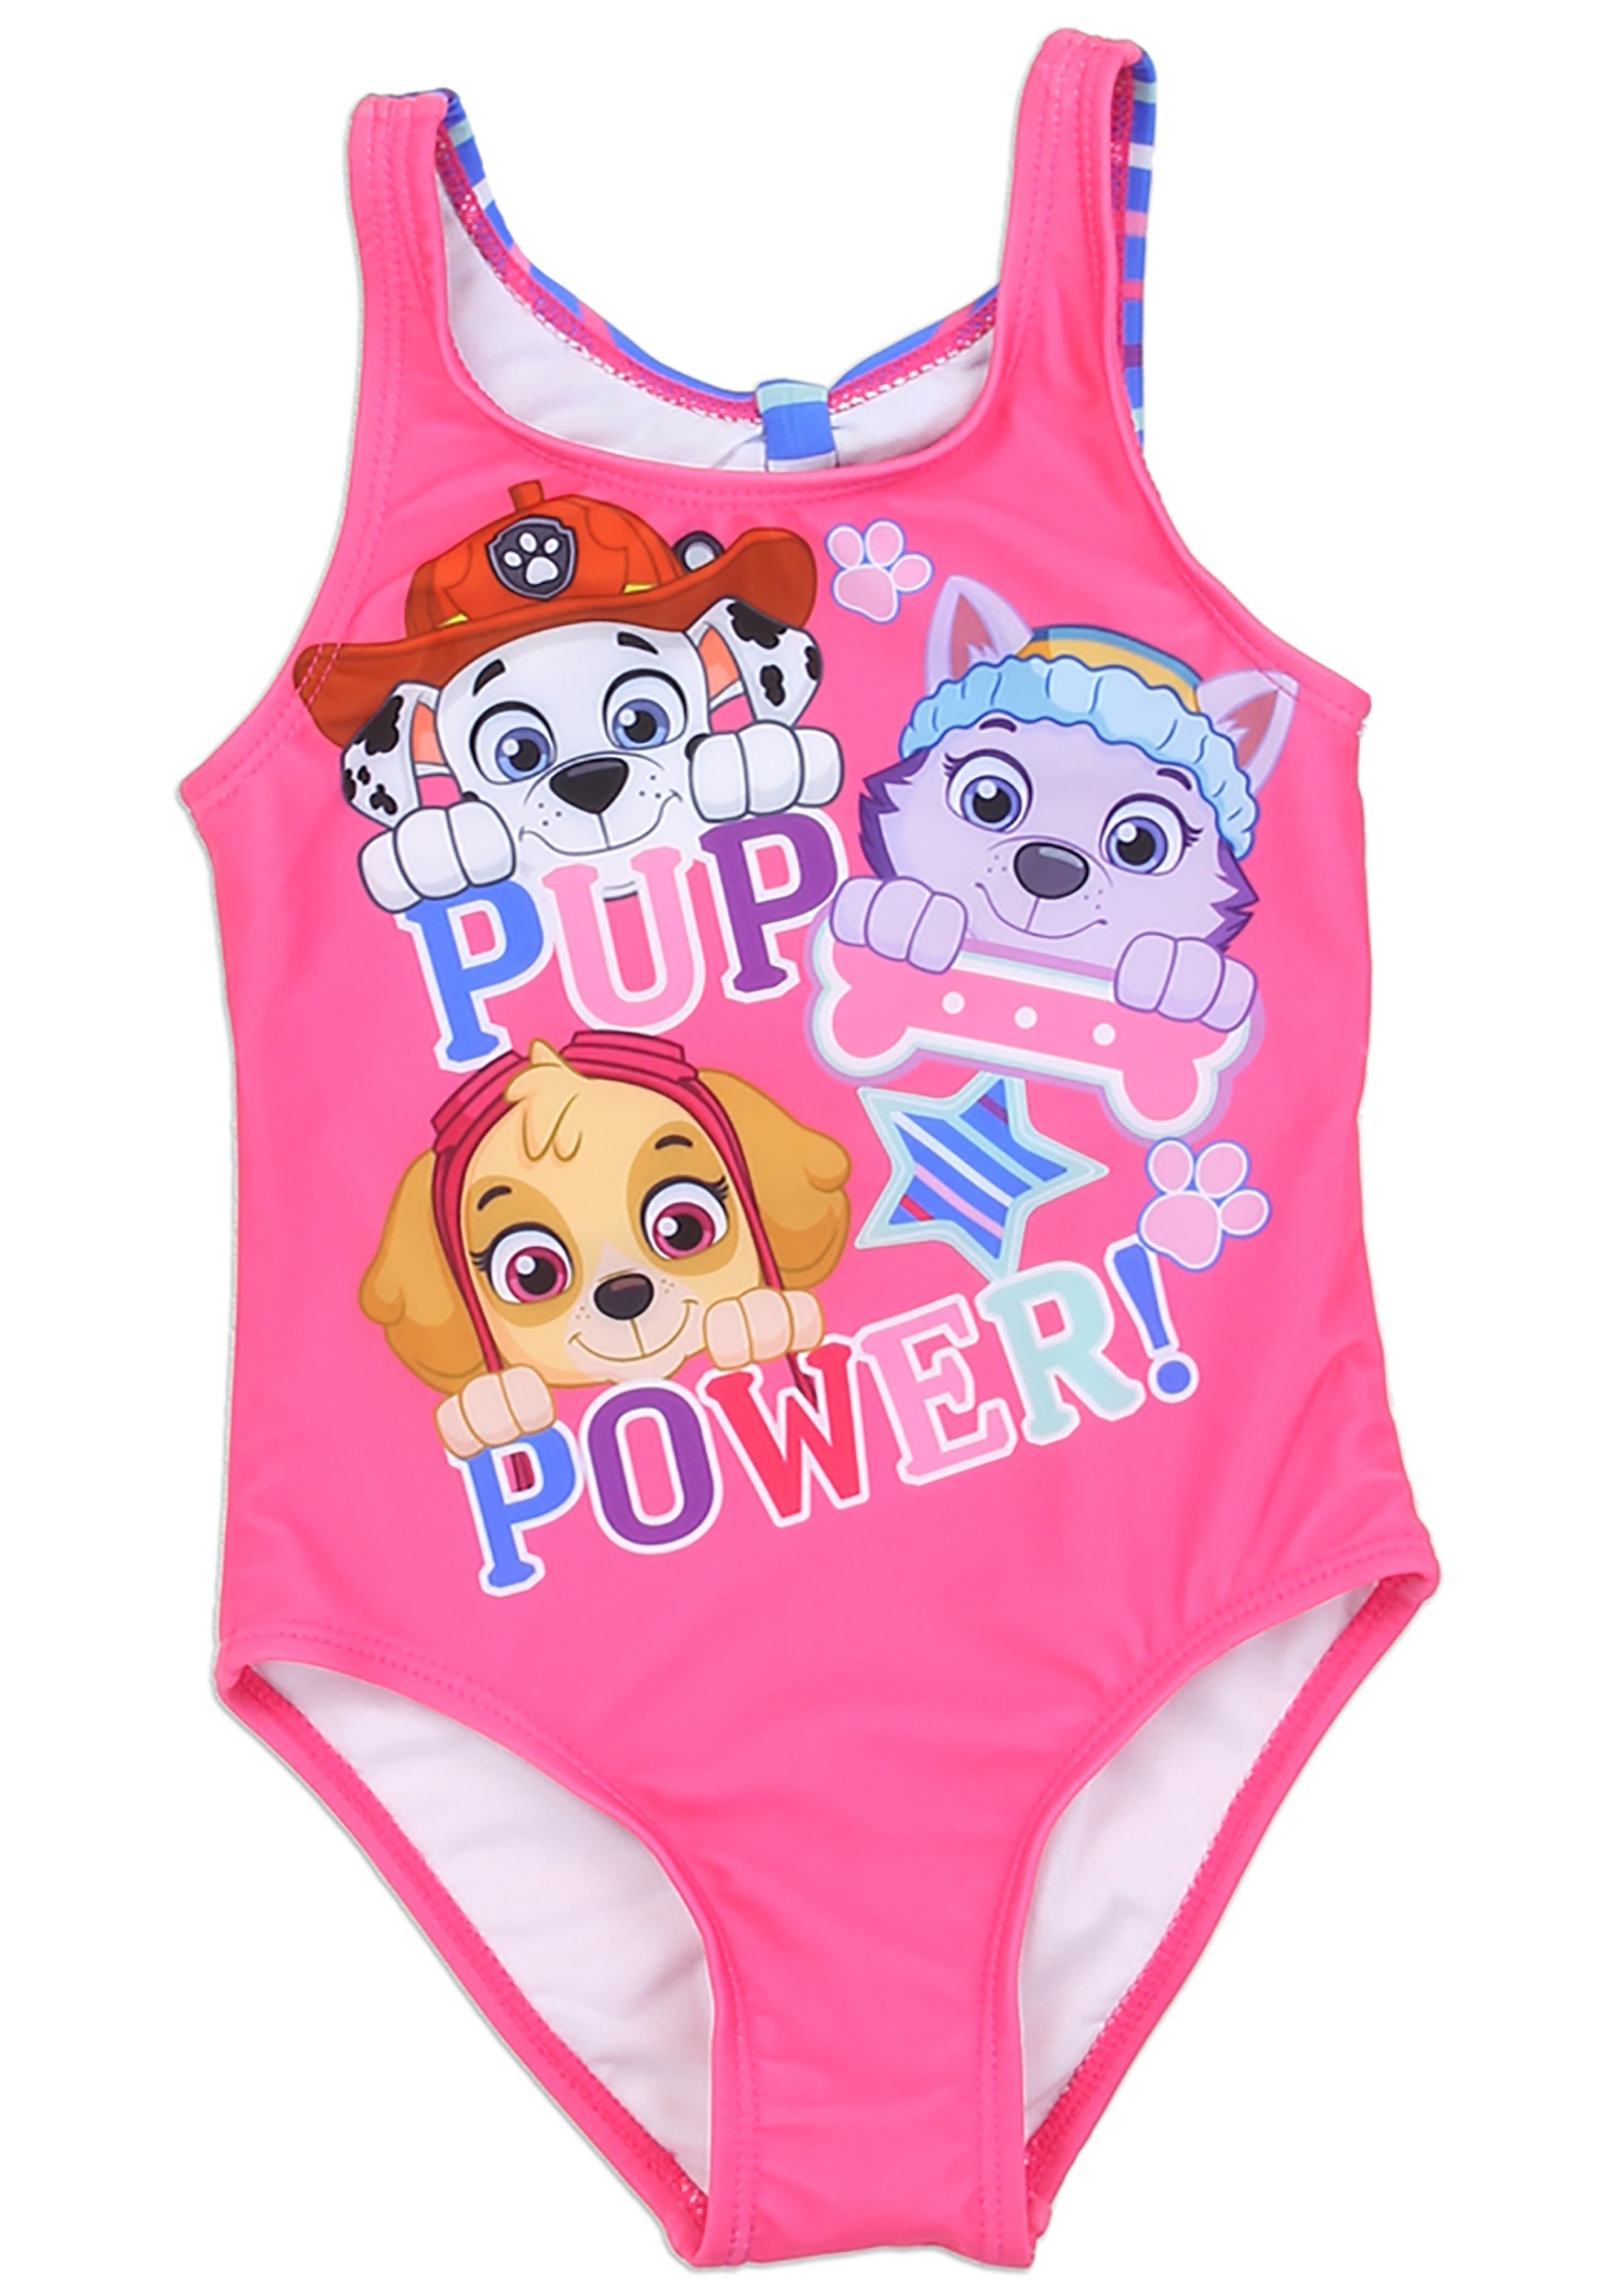 Girls SKYE Paw Patrol Character Swimsuit OFFICIAL MERCHANDISE 